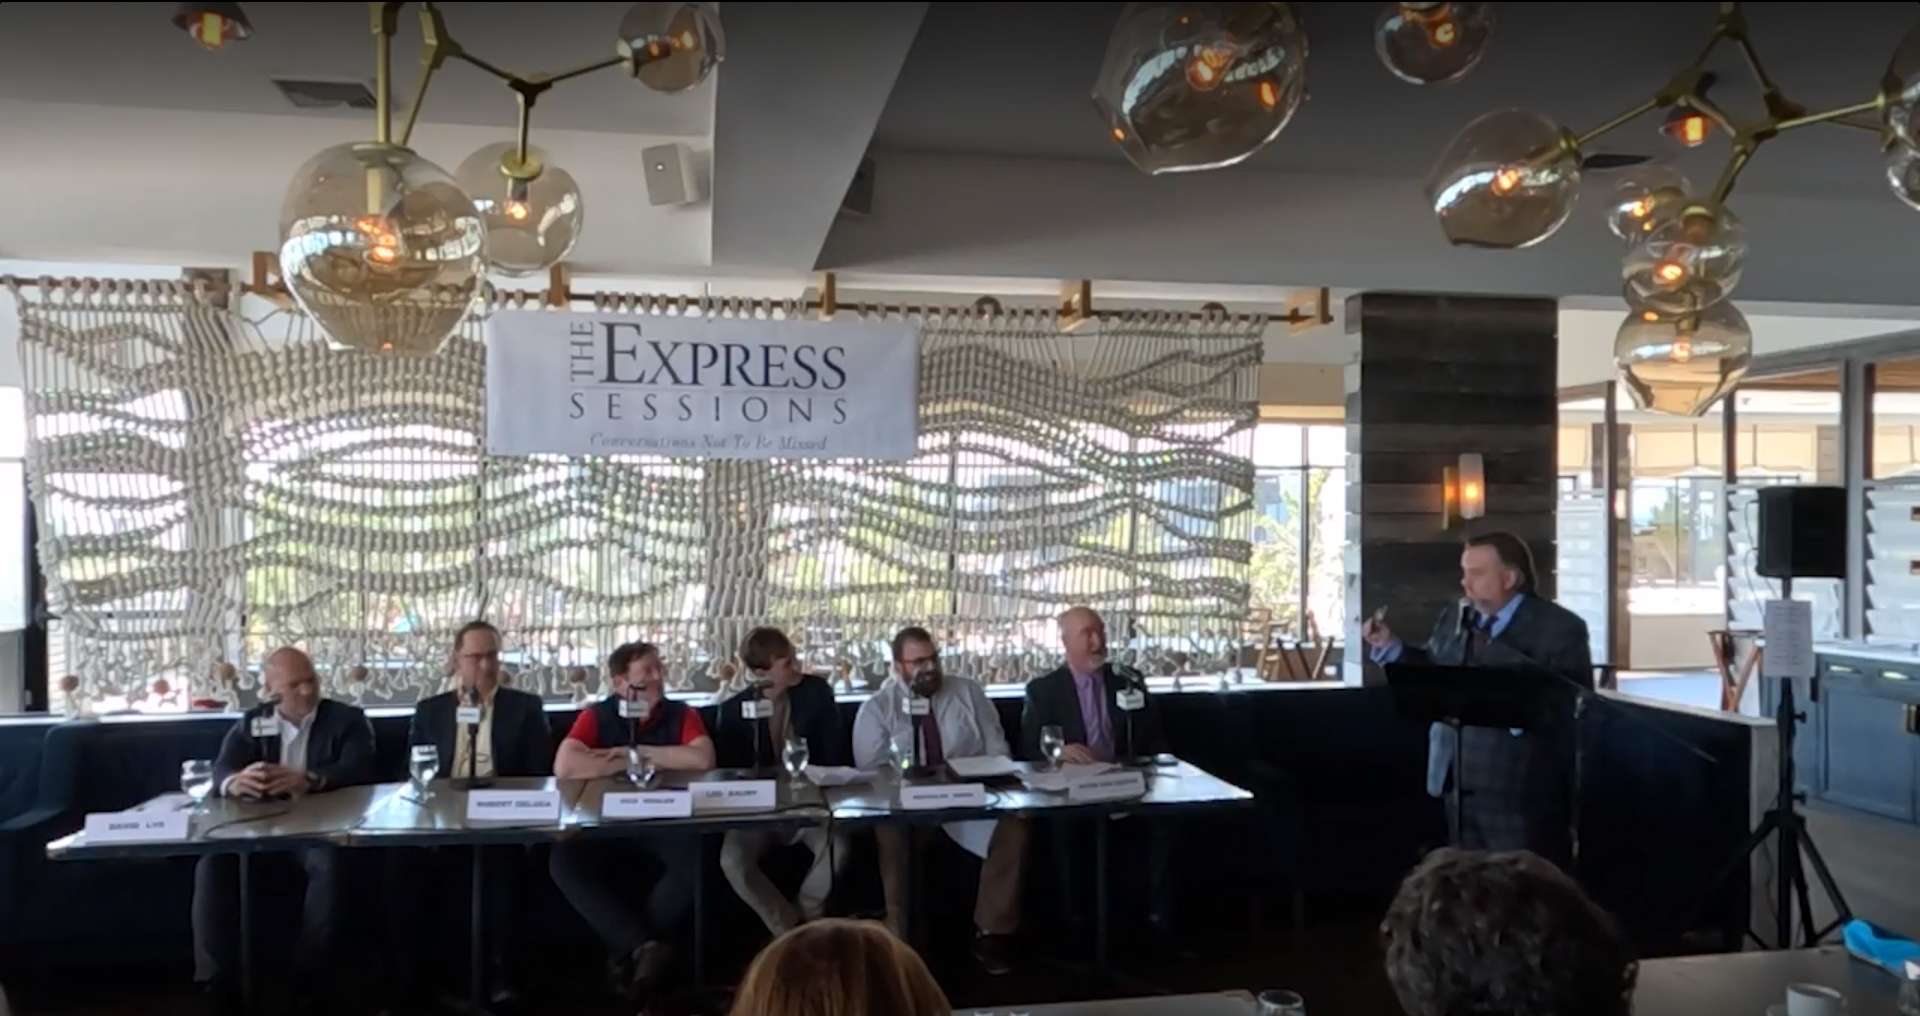 The Express Sessions panel.